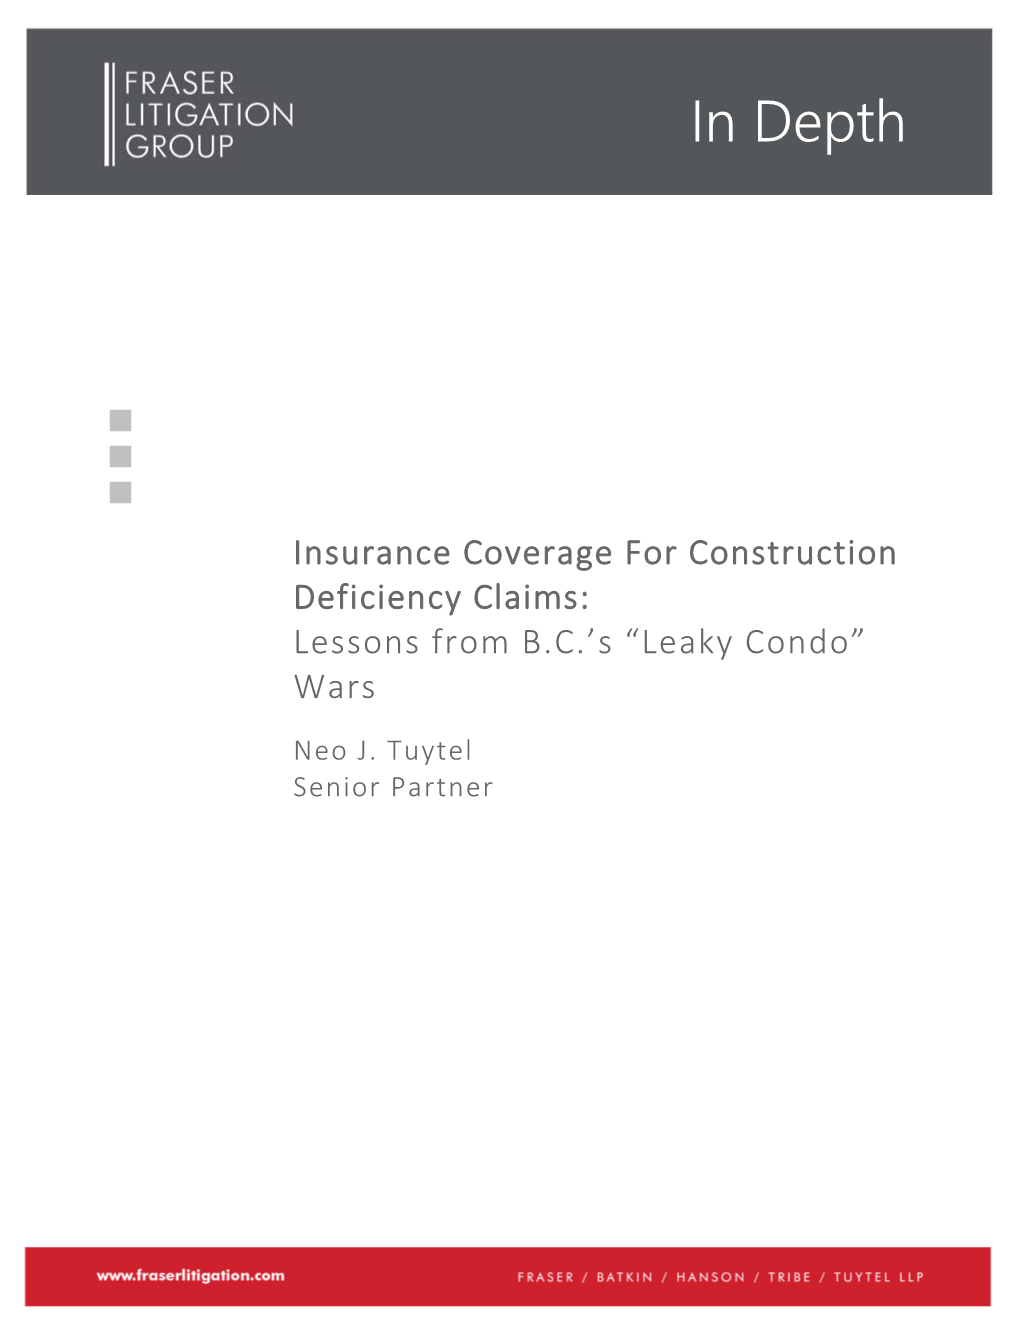 Insurance Coverage for Construction Deficiency Claims.DOCX